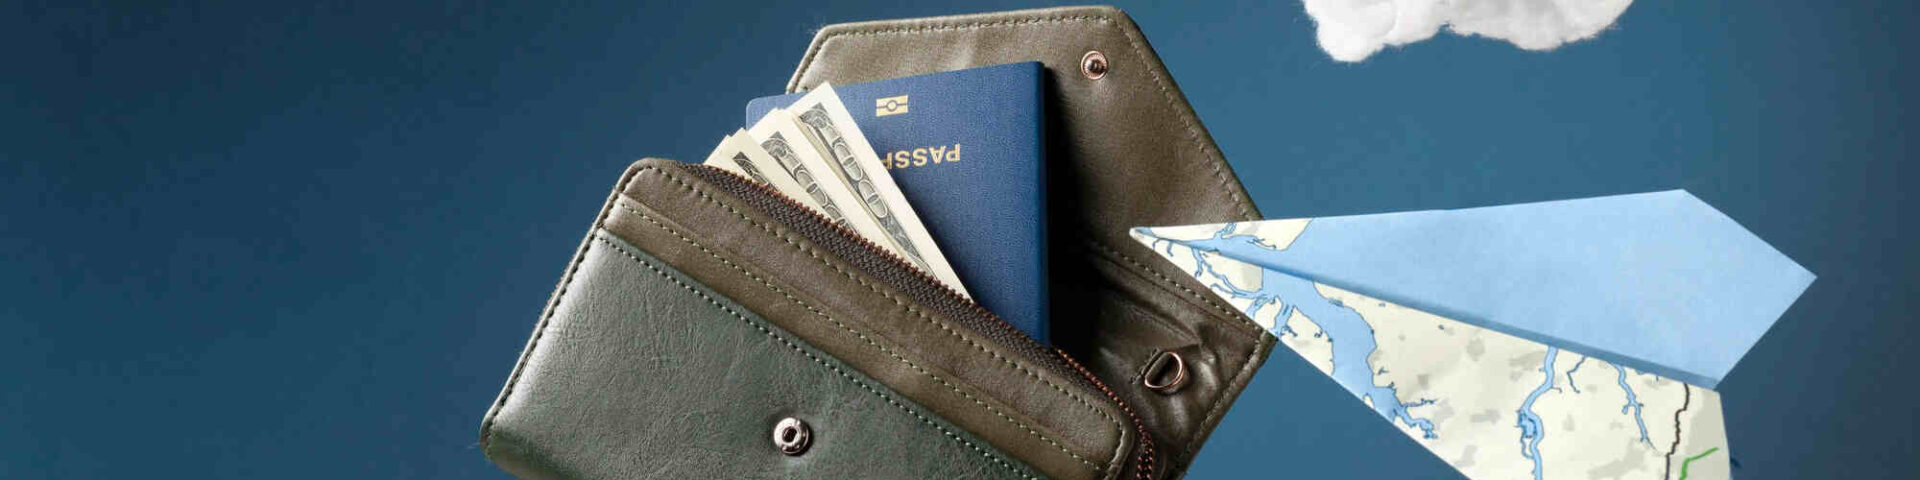 Travel wallet is the first step to planning big and affordable trips overseas. Make sure to go through our two minute guide to make sure you are on right and economical side for wallet happy and good travels outside the states, coast to coast and intercontinental!